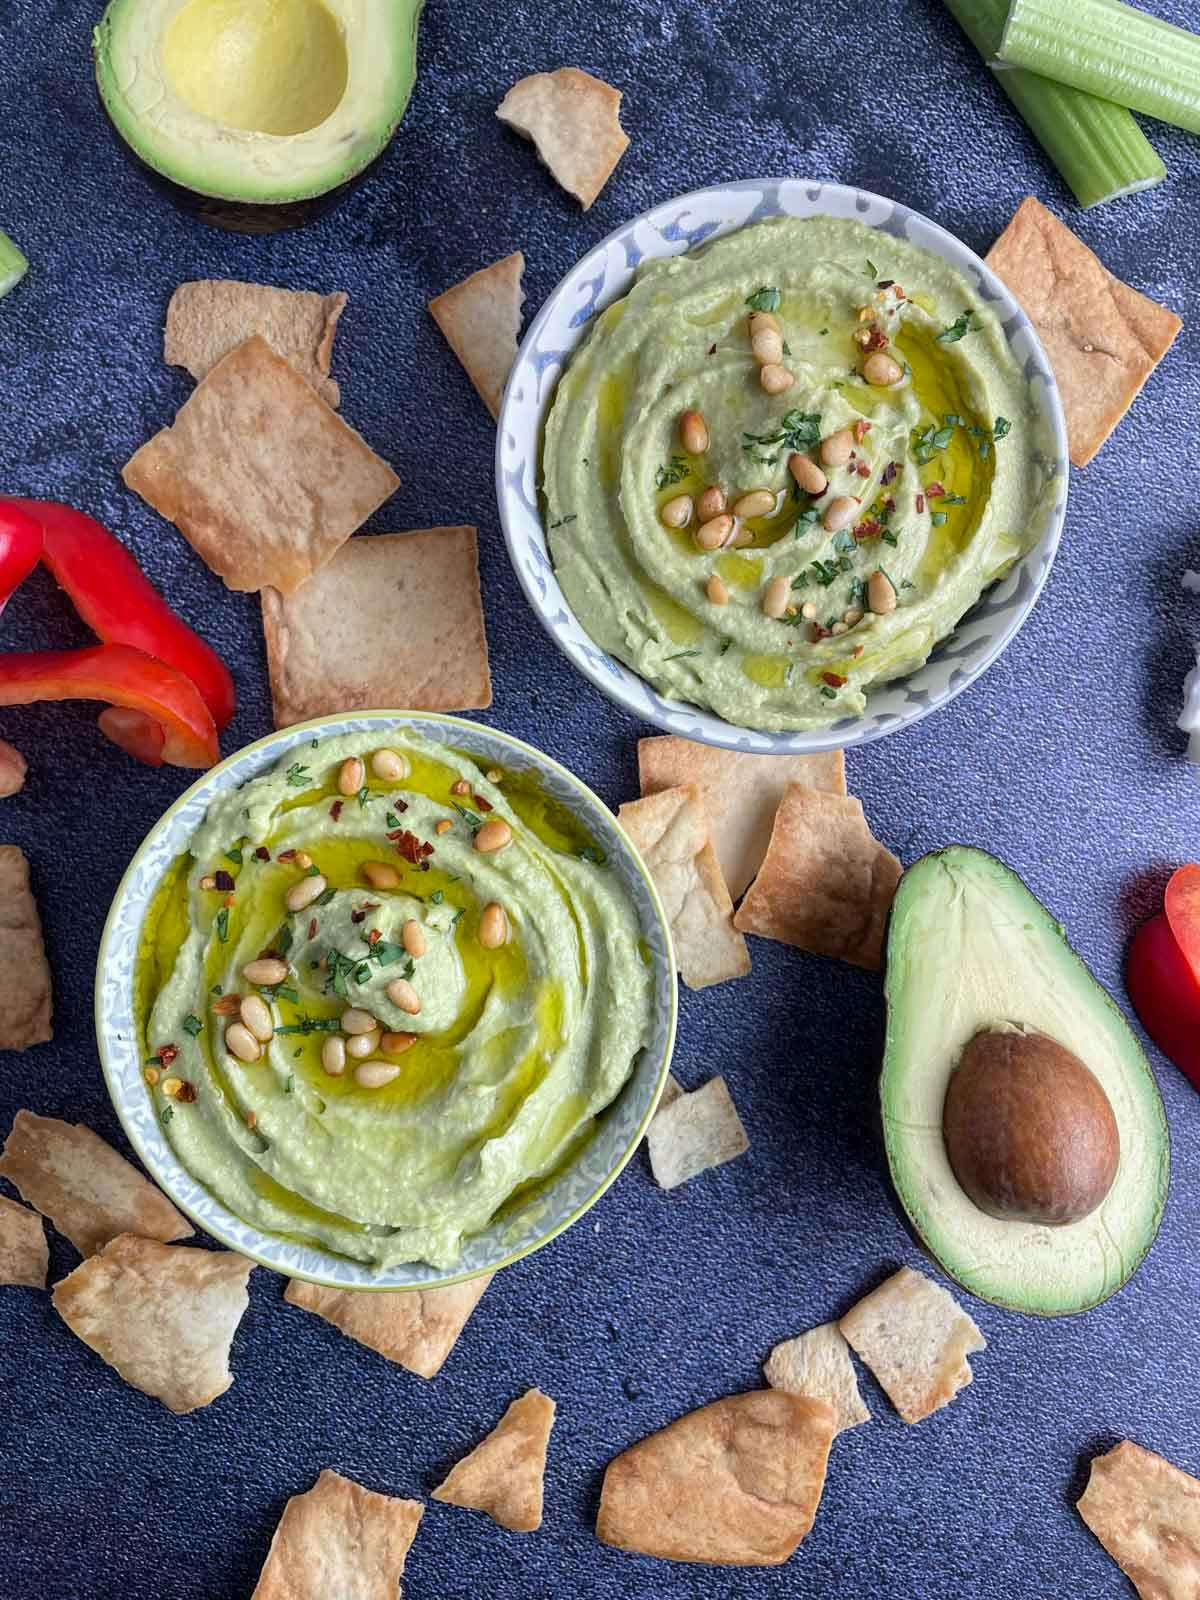 Two bowls of creamy avocado hummus surrounded by pita chips and veggies.